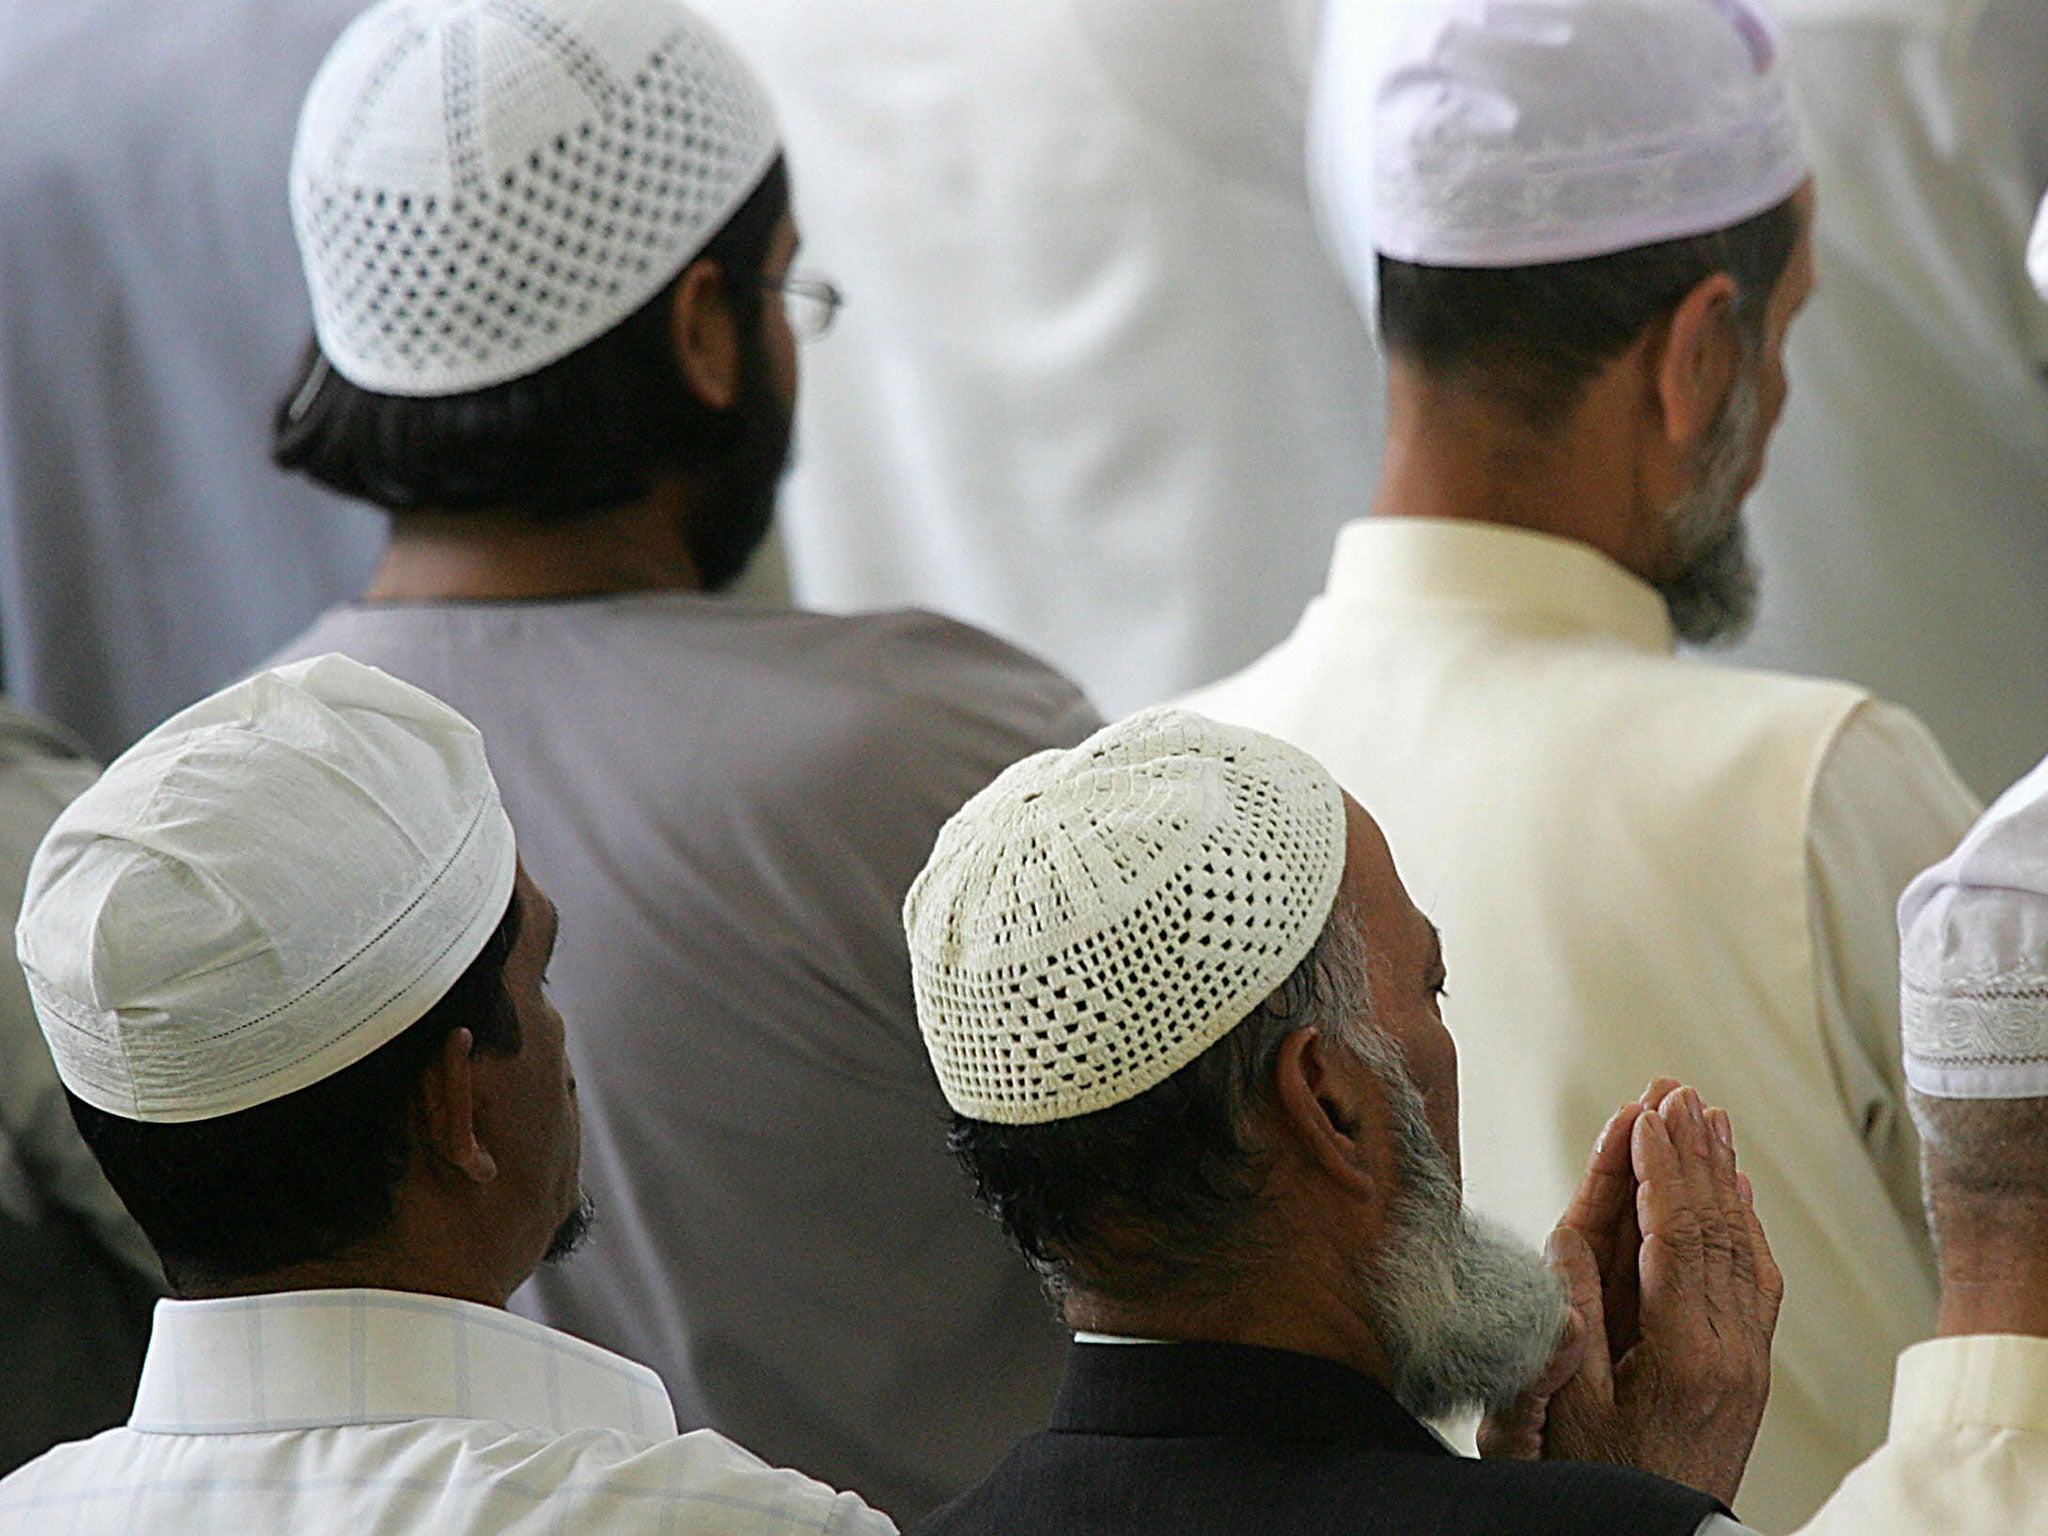 British muslims pray during Friday prayer at the East London mosque